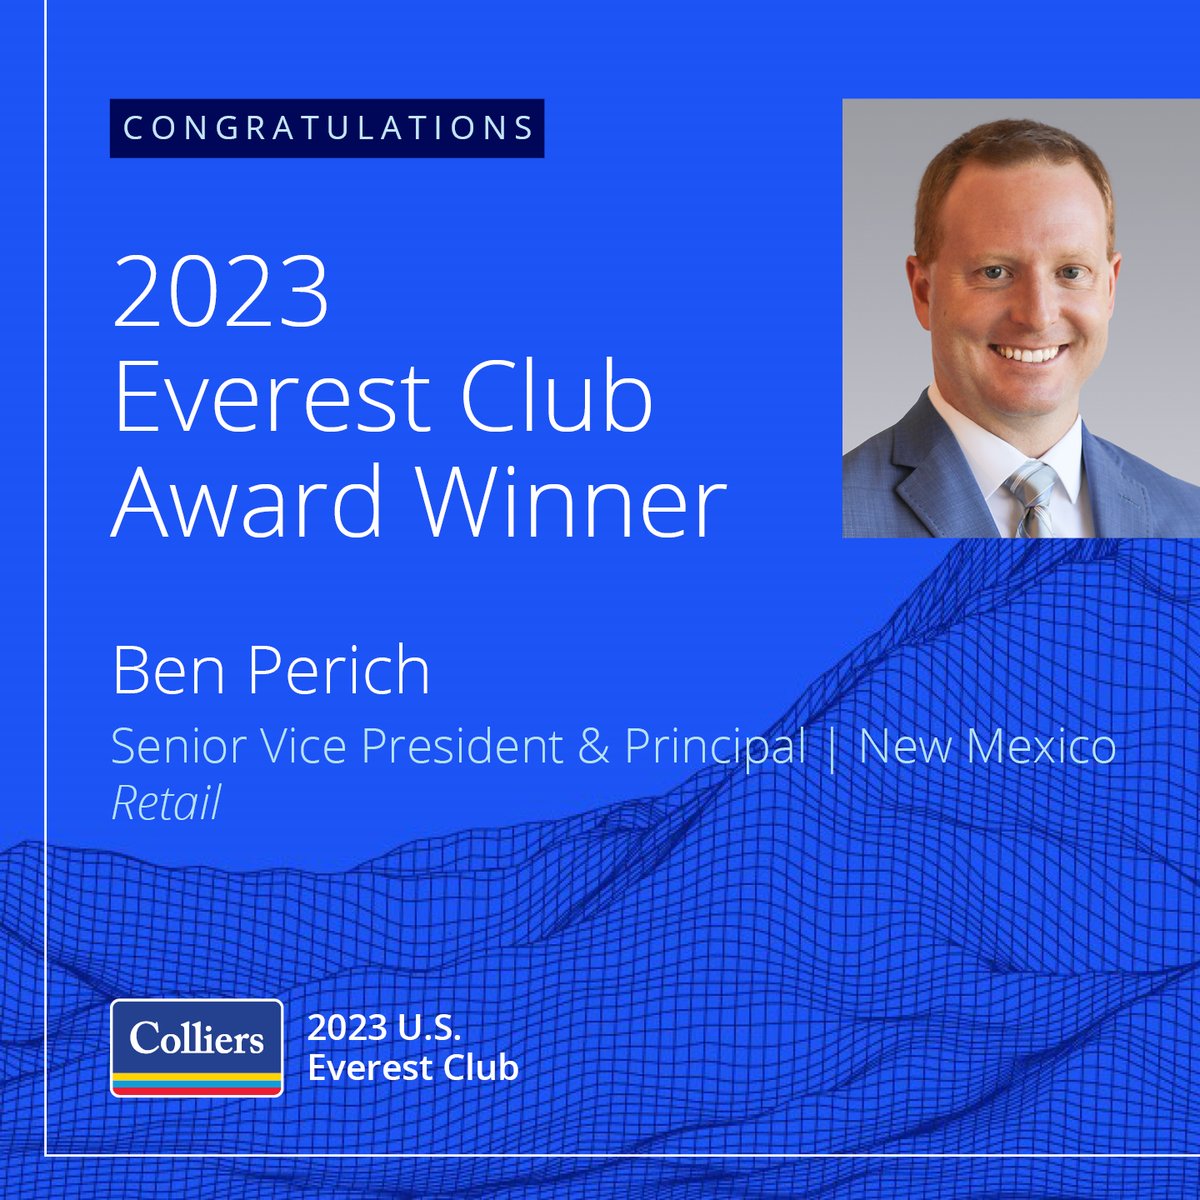 Join us in congratulating Ben Perich, Sr. Vice President and Principal, on being inducted into Colliers’ 2023 Everest Club!

The Everest Club represents the top 10% of all Colliers producers across the United States. Bravo, Ben!

#AcceleratingSuccess #ColliersNM #2023EverestClub